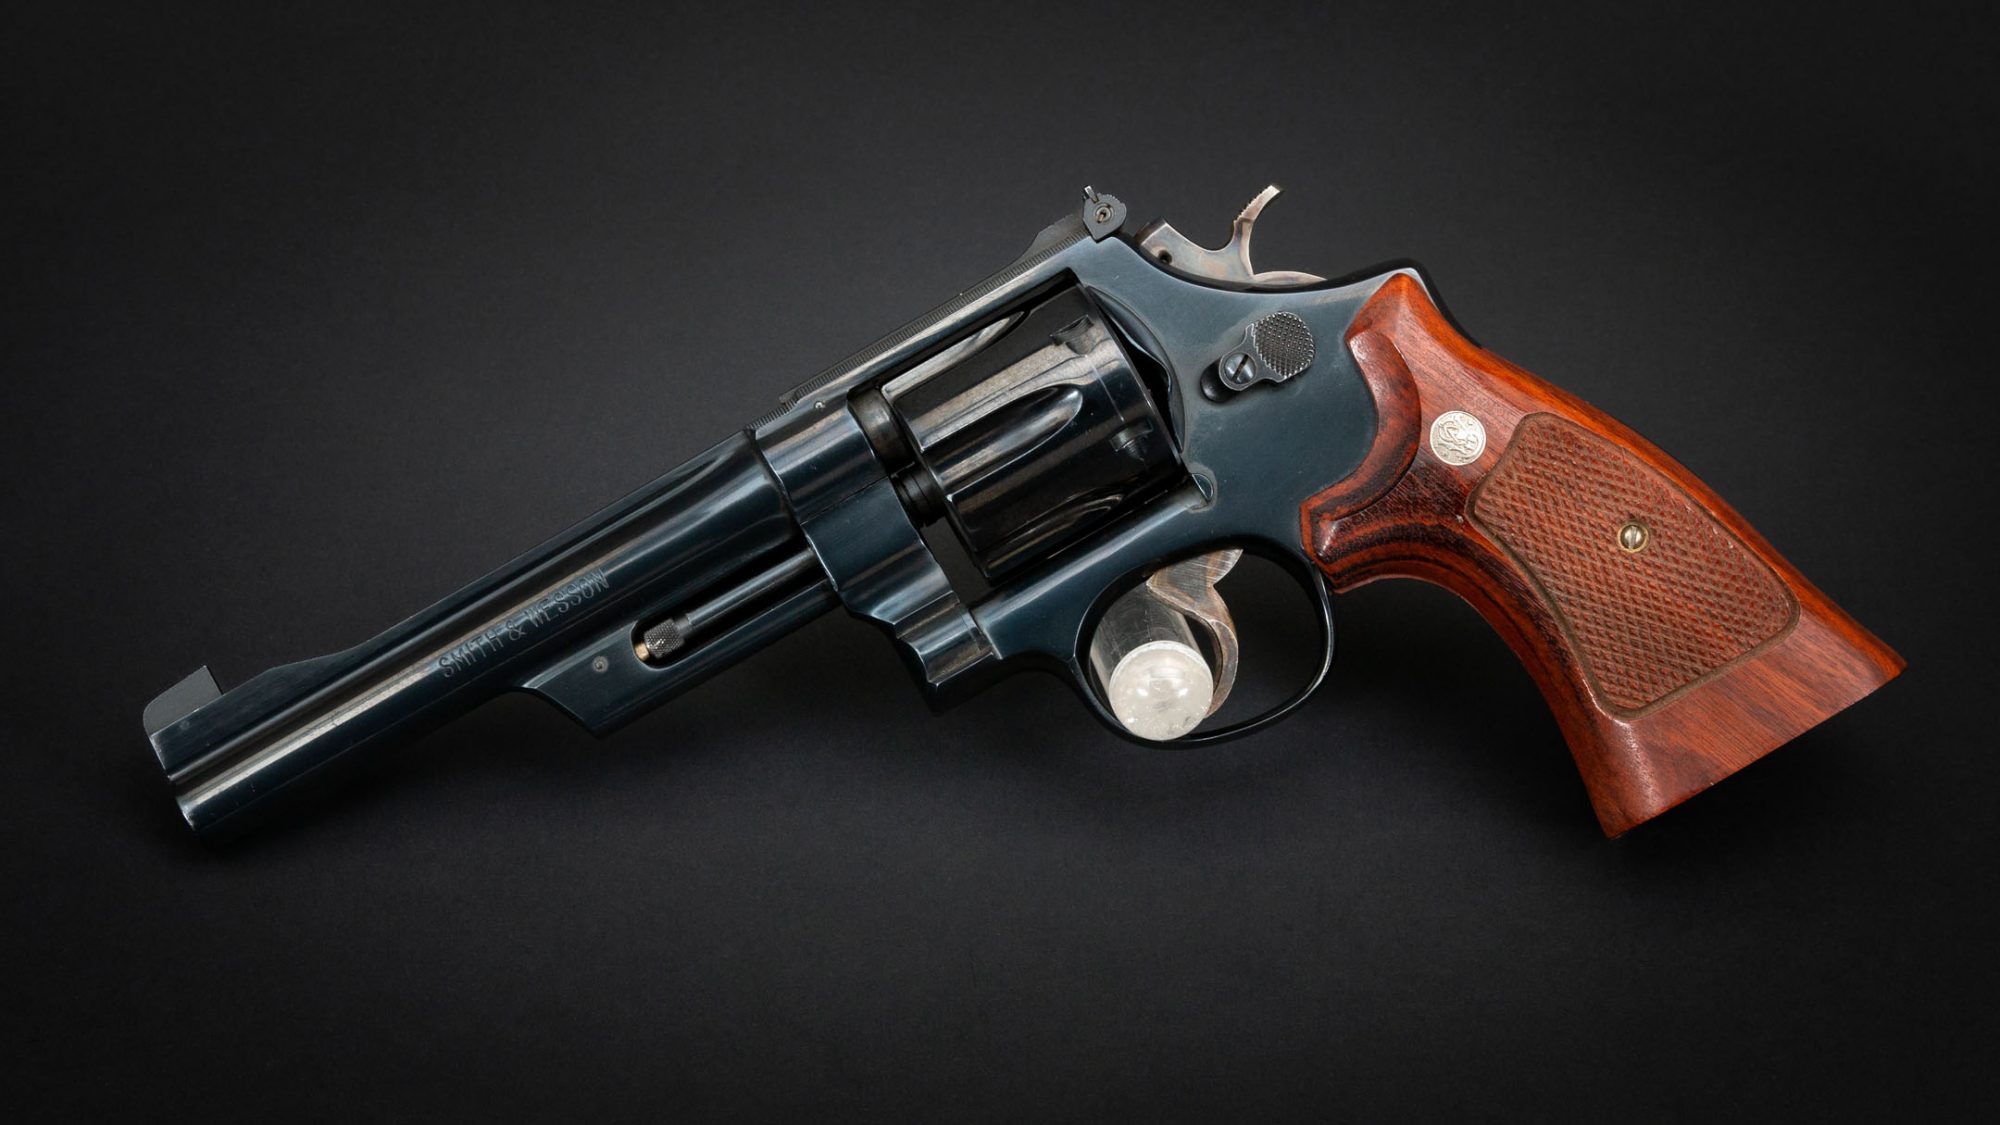 Smith & Wesson Model 27-2 in 357 Magnum, for sale by Turnbull Restoration Co. of Bloomfield, NY